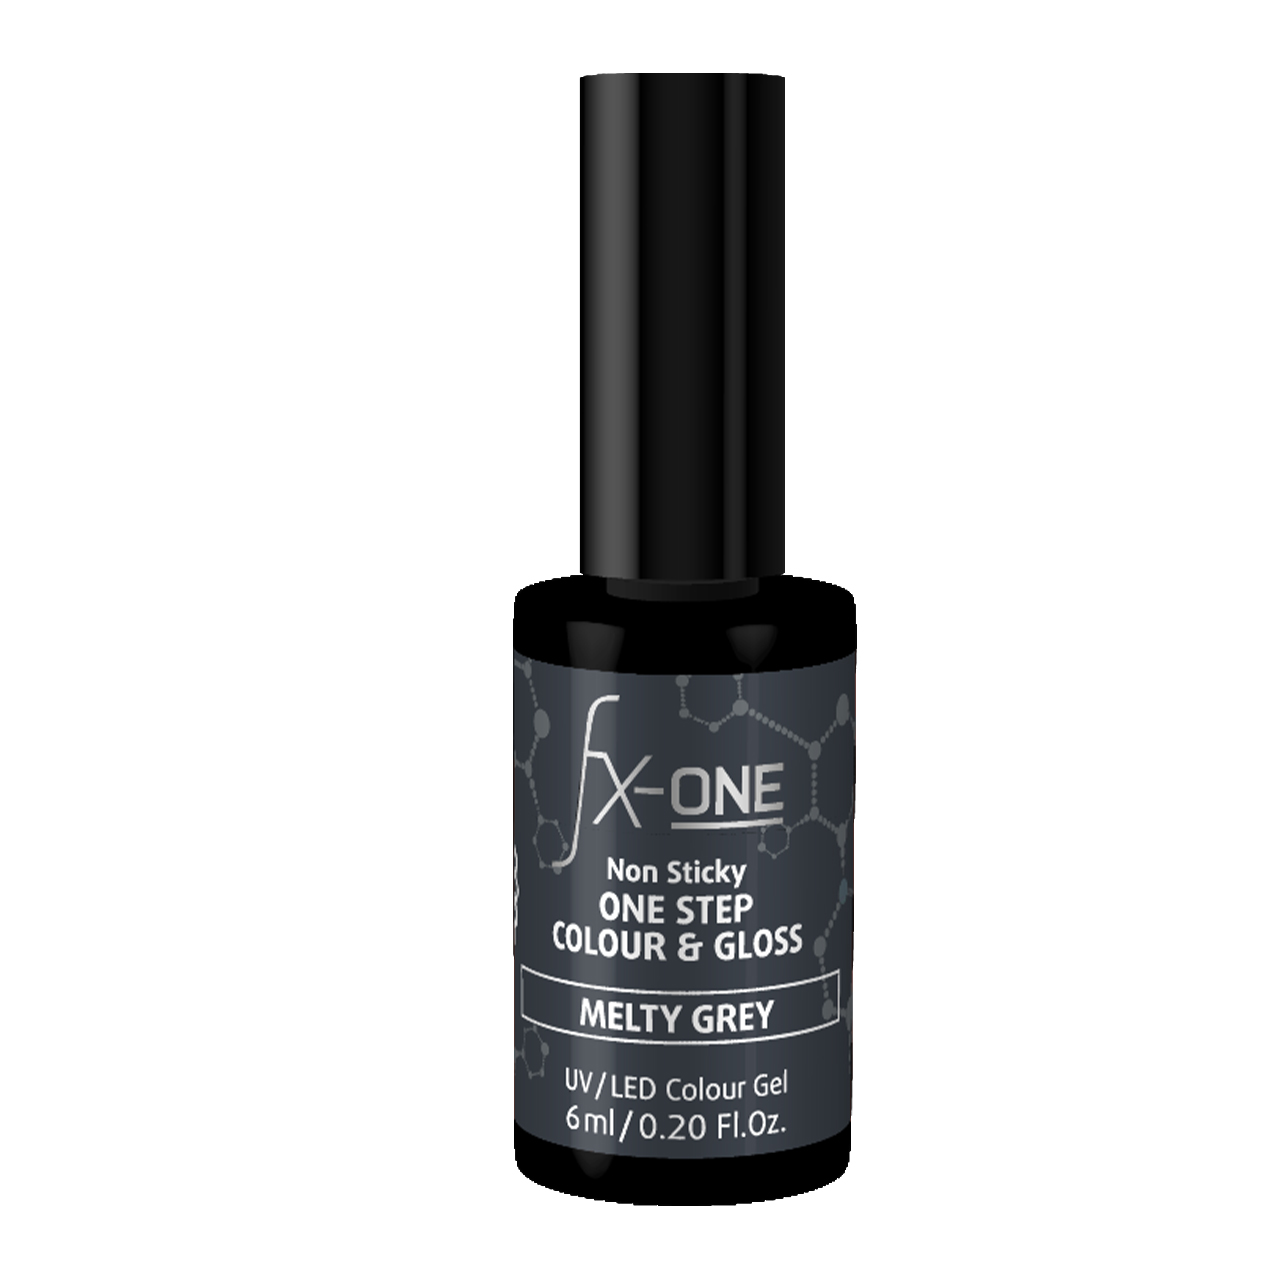 FX-ONE Colour & Gloss Melty Grey 6ml